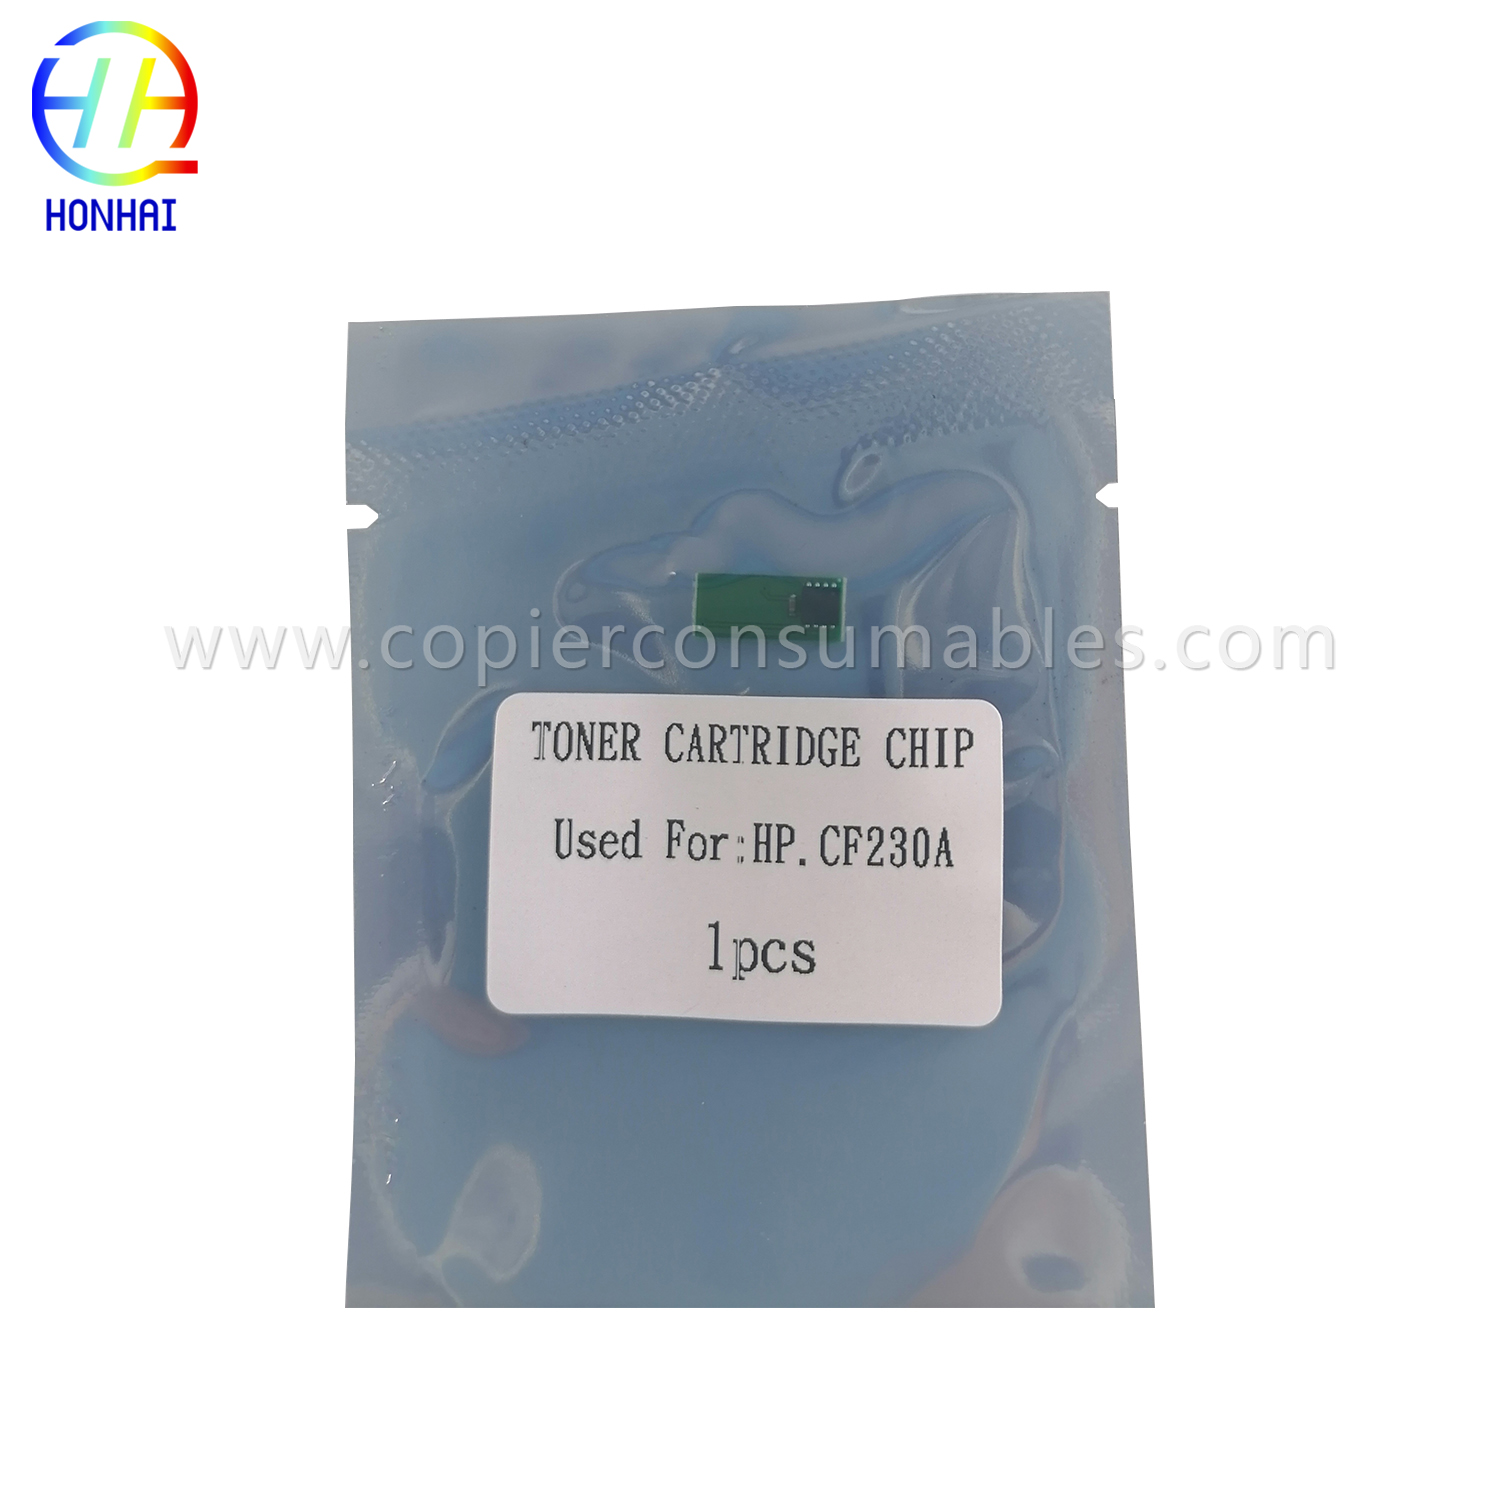 Toner Chip for HP M203 CF230A